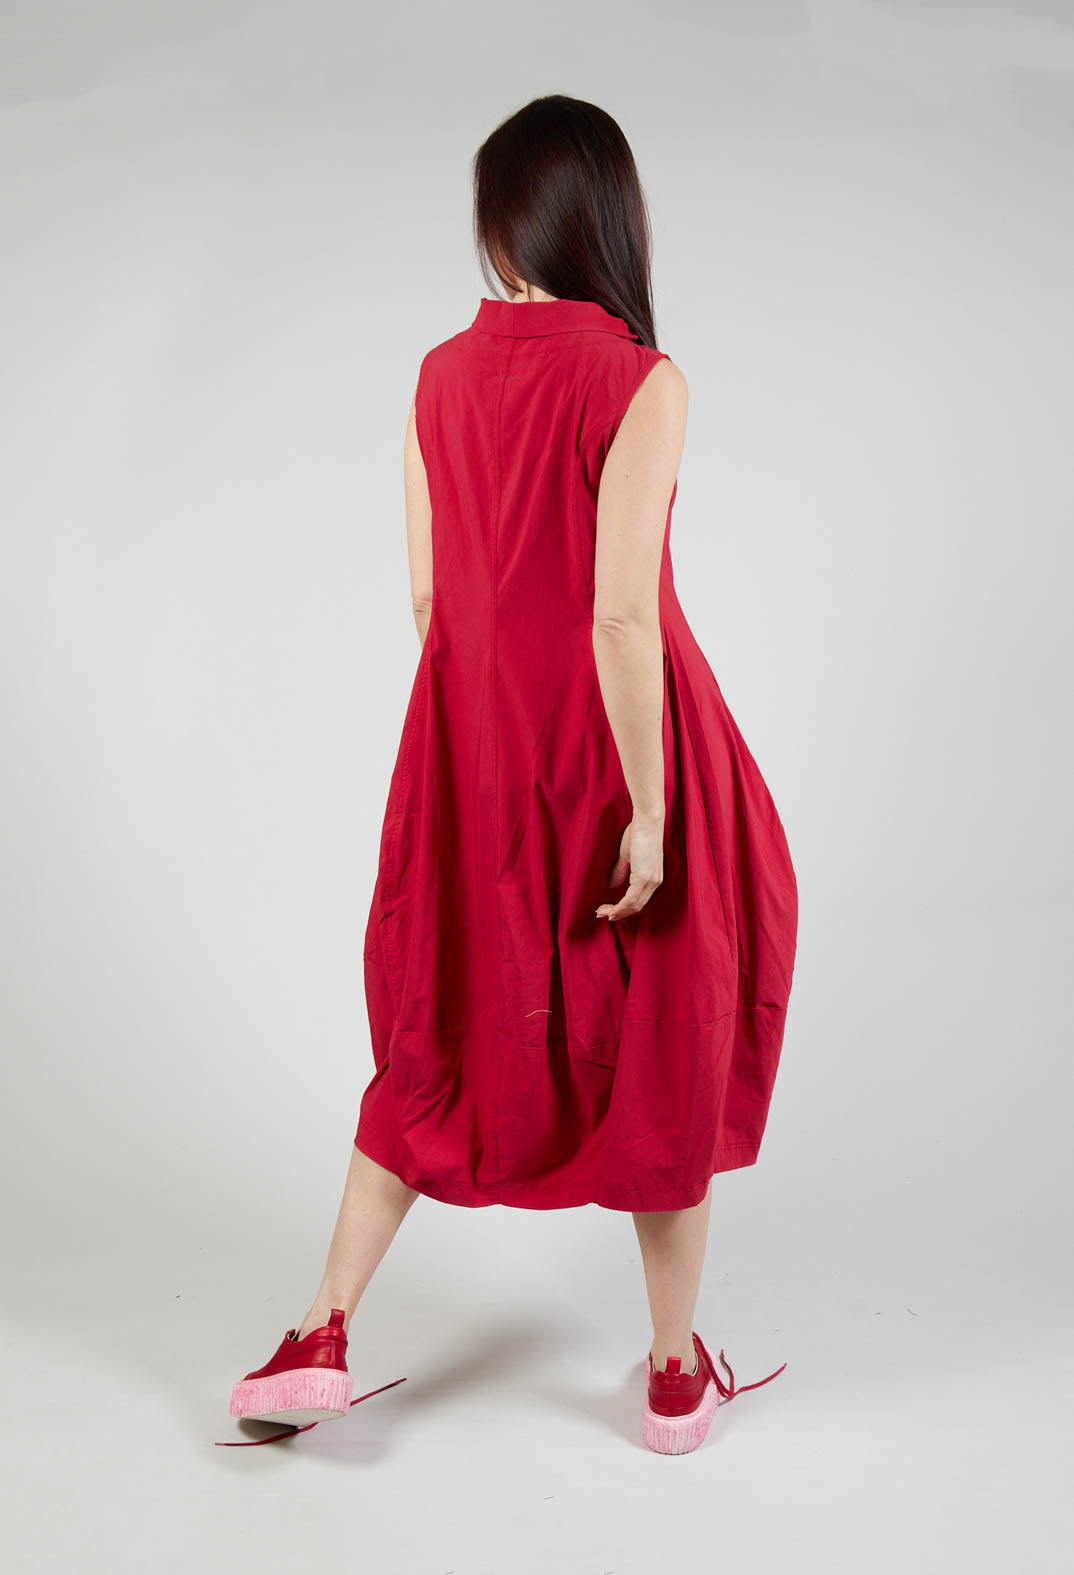 Sleeveless Dress with Feature Neckline in Chili